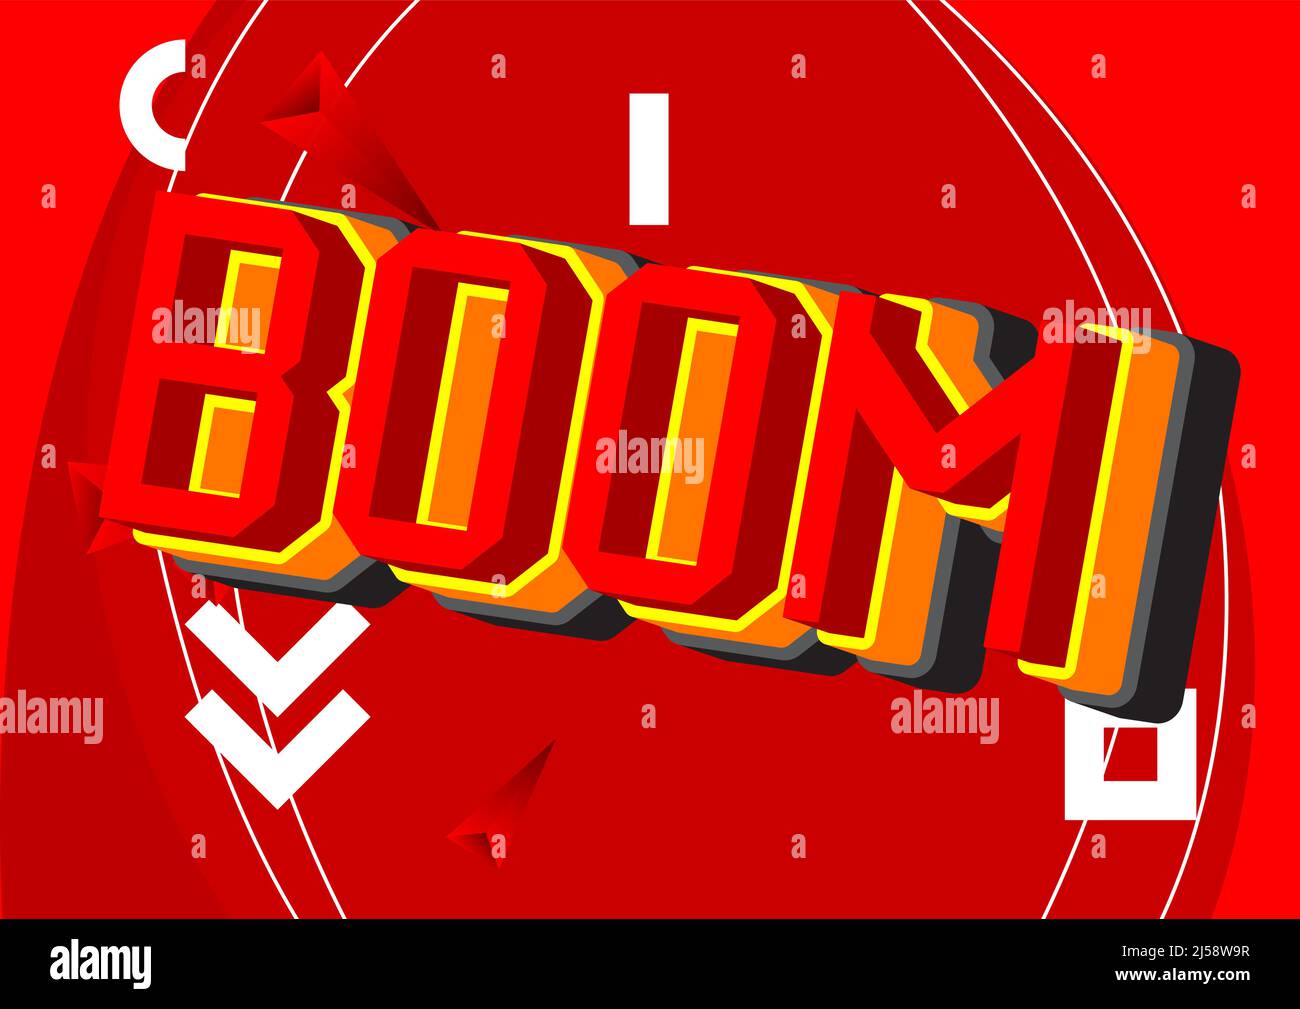 Boom pixelated word with geometric graphic background. Vector cartoon illustration. Stock Vector